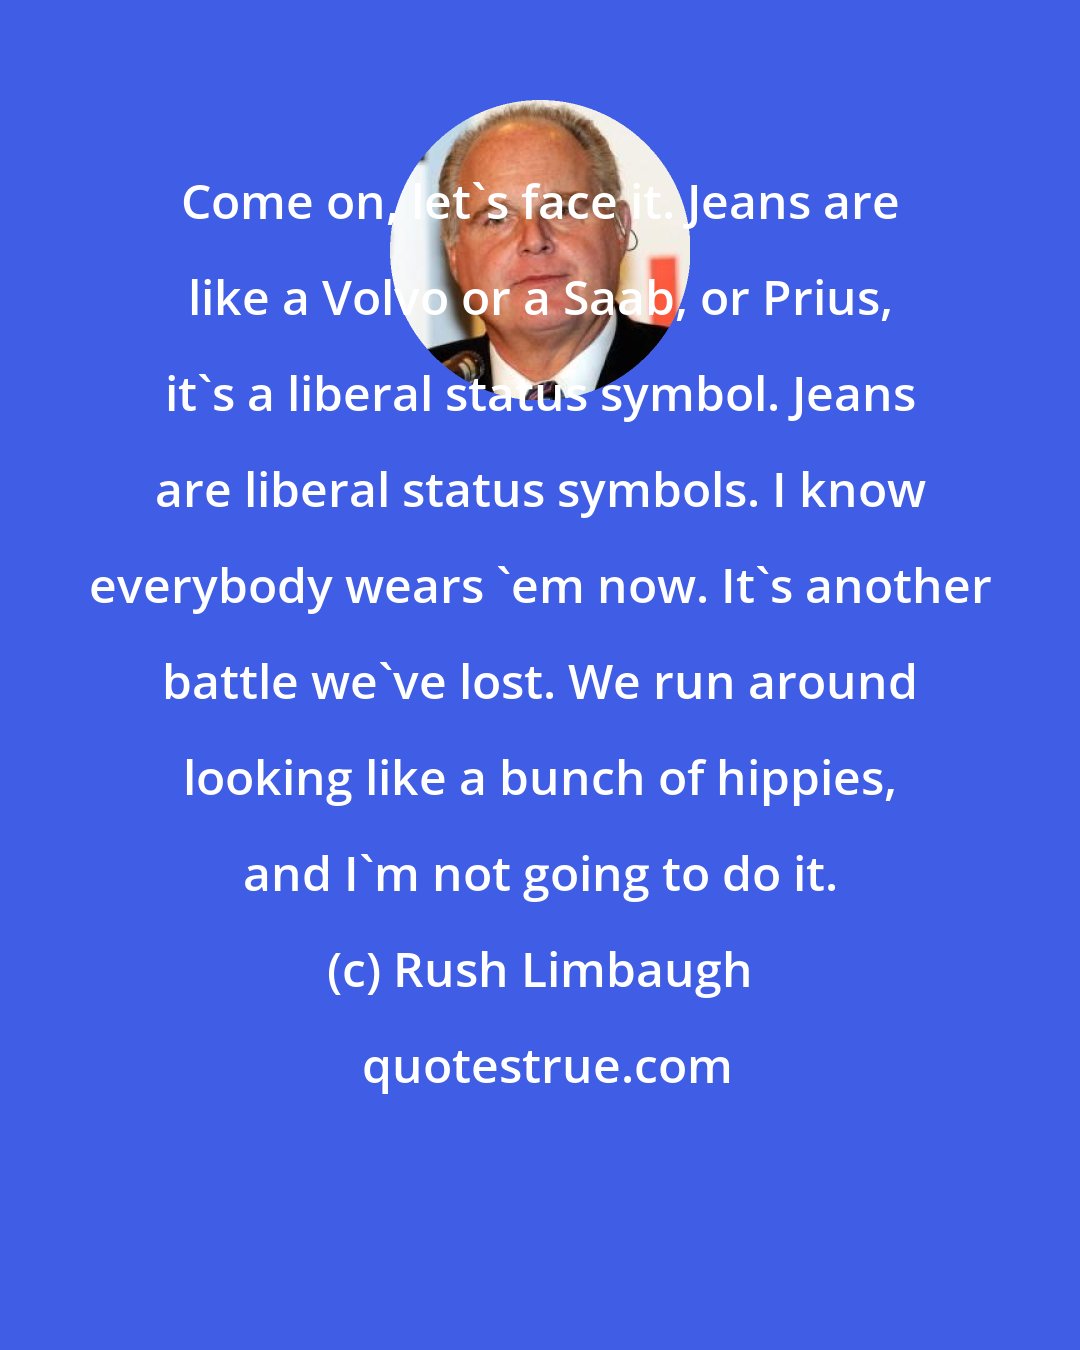 Rush Limbaugh: Come on, let's face it. Jeans are like a Volvo or a Saab, or Prius, it's a liberal status symbol. Jeans are liberal status symbols. I know everybody wears 'em now. It's another battle we've lost. We run around looking like a bunch of hippies, and I'm not going to do it.